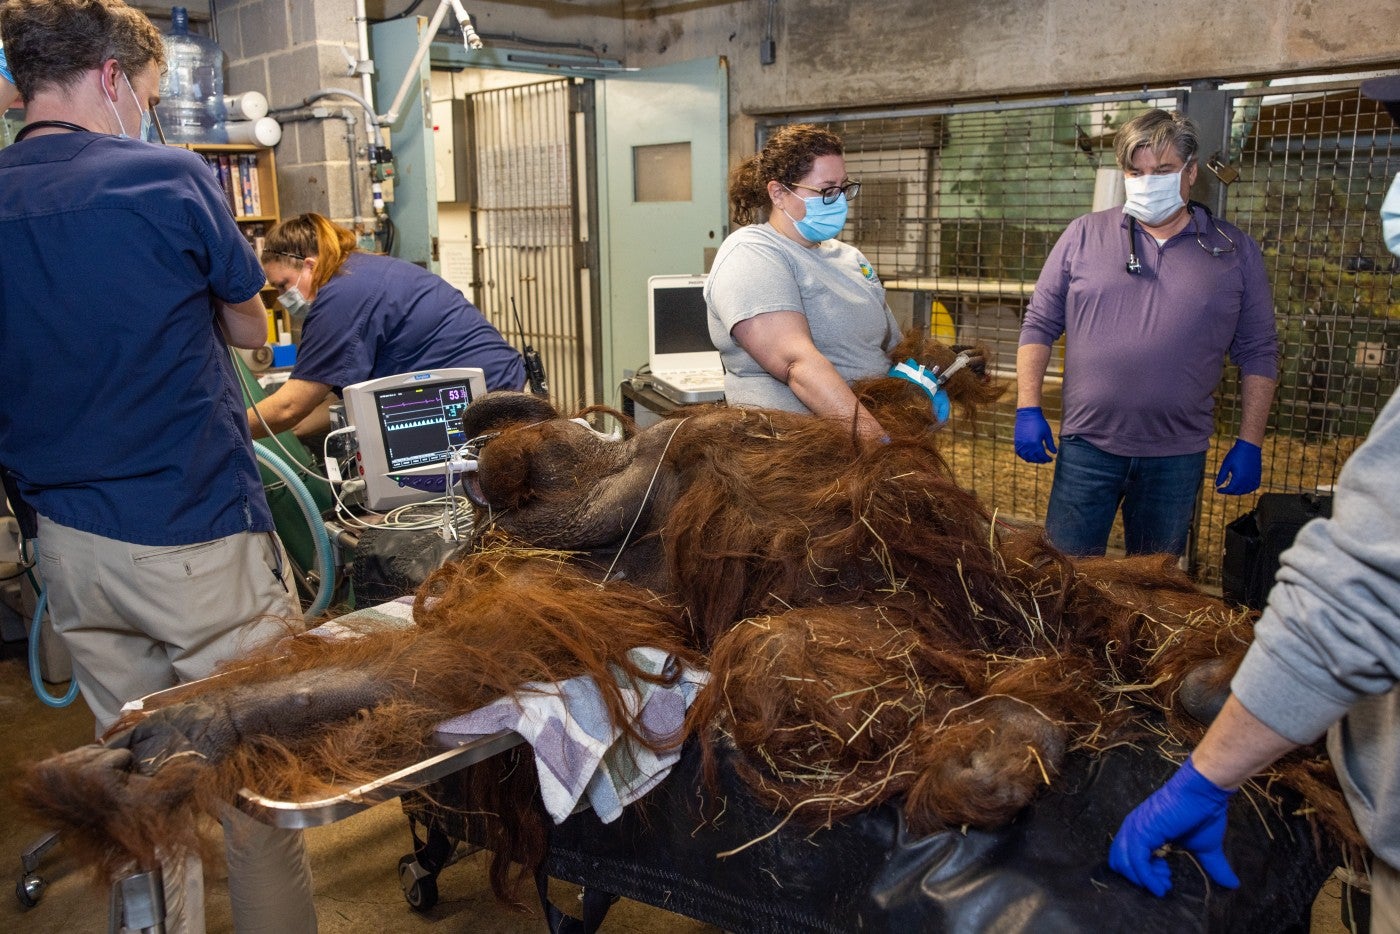 The primate and veterinary teams conduct a medical exam on Kyle orangutan.